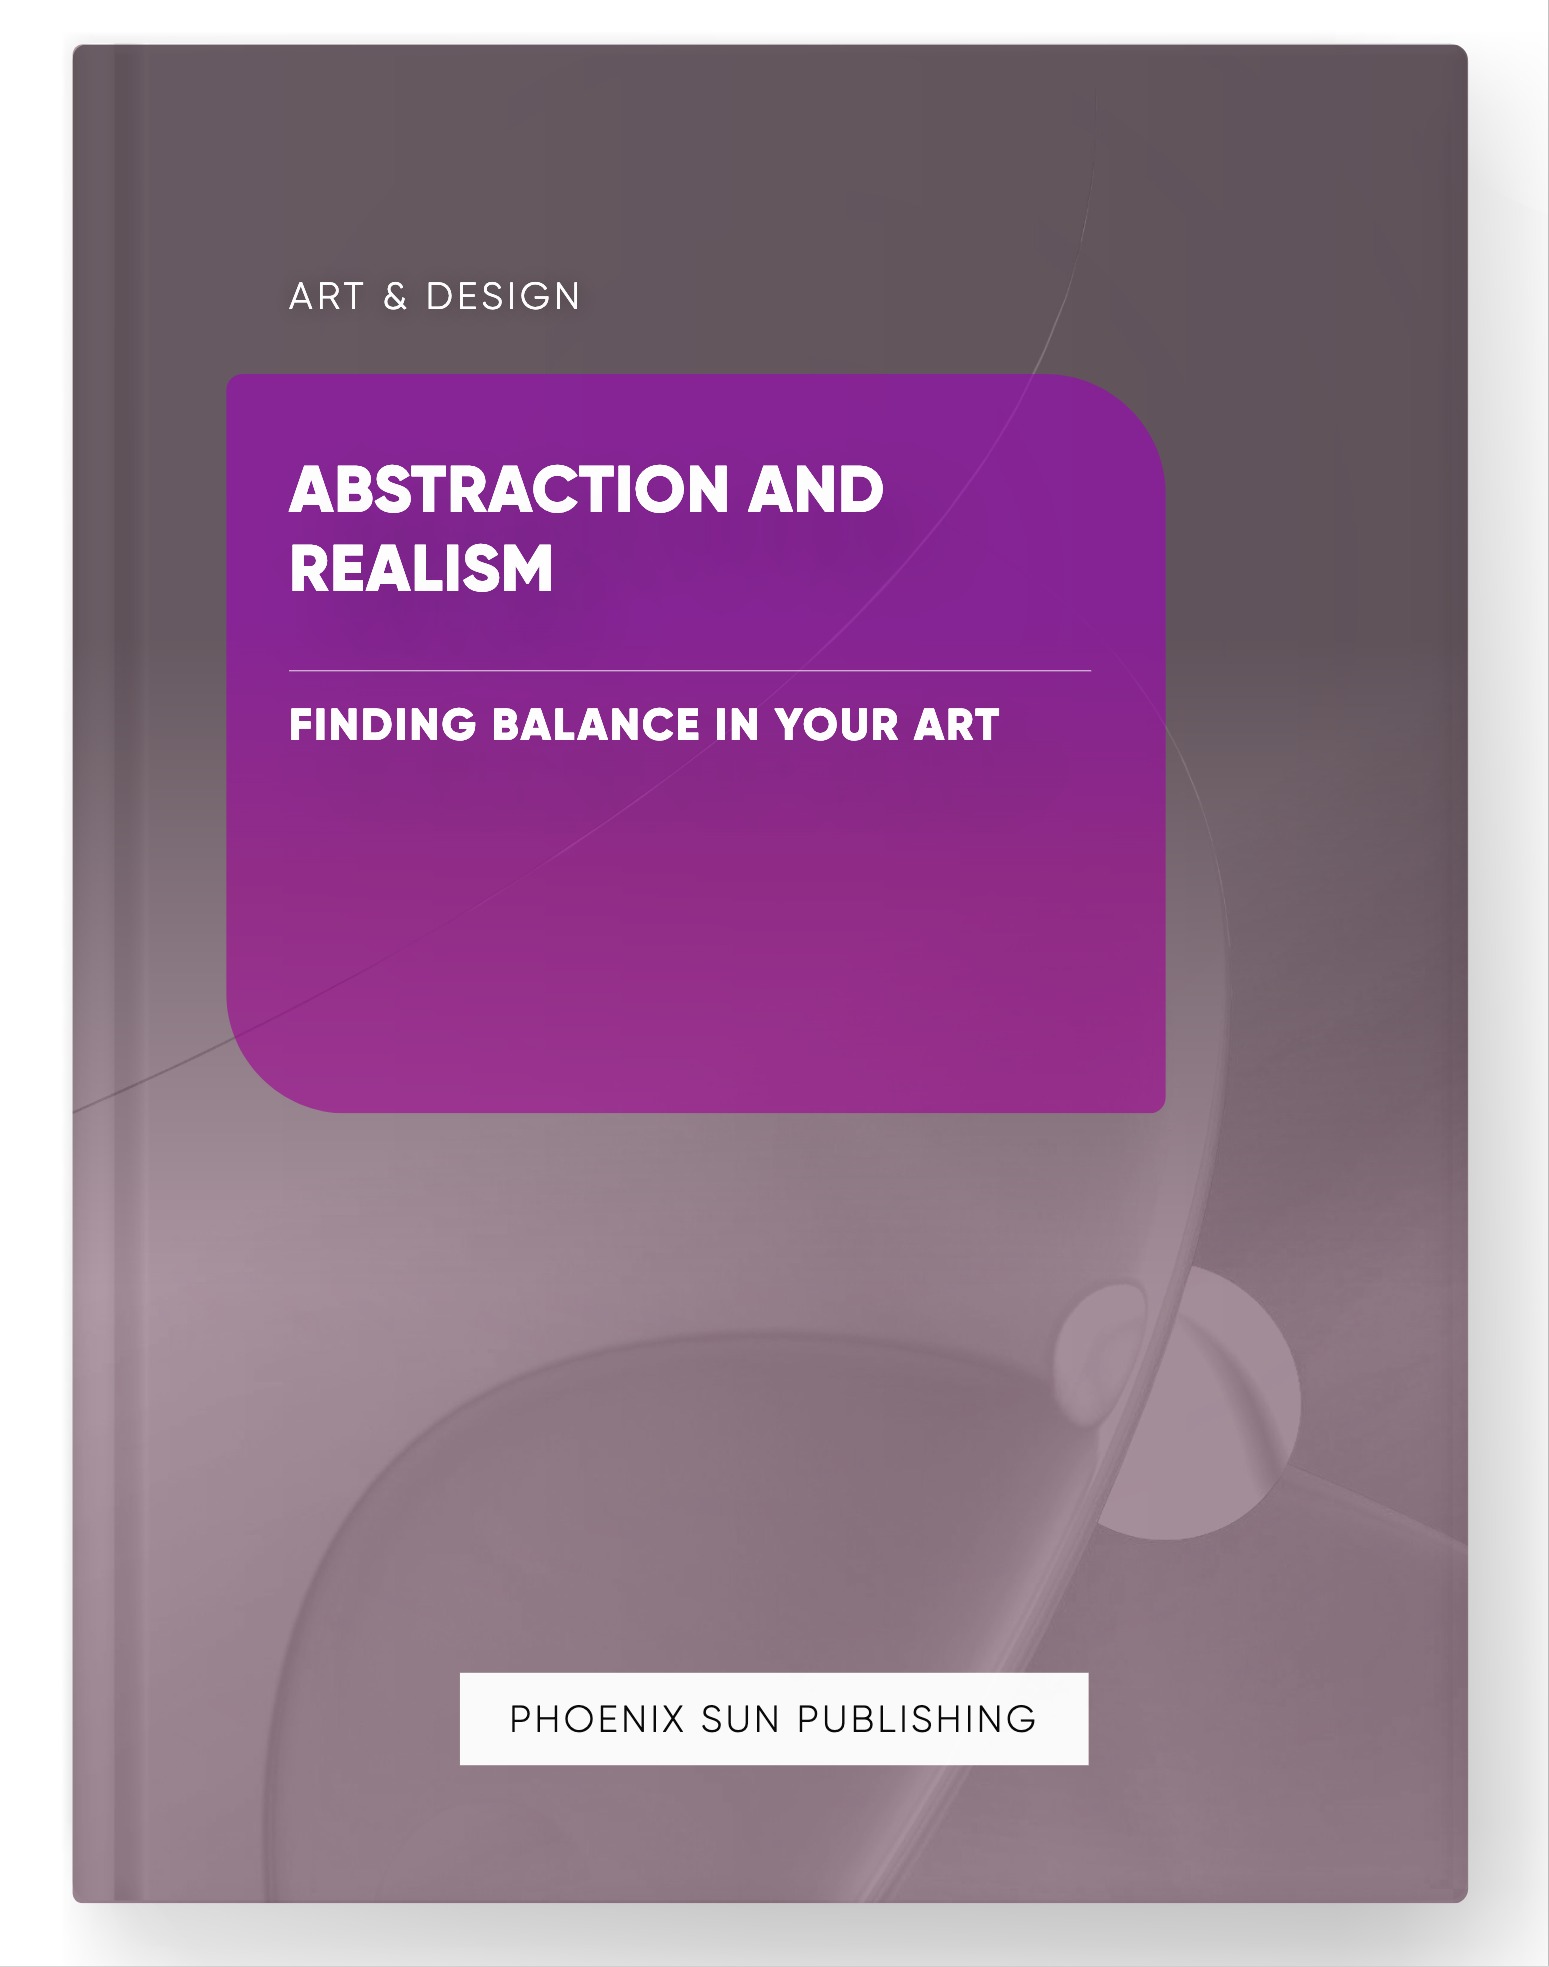 Abstraction and Realism – Finding Balance in Your Art